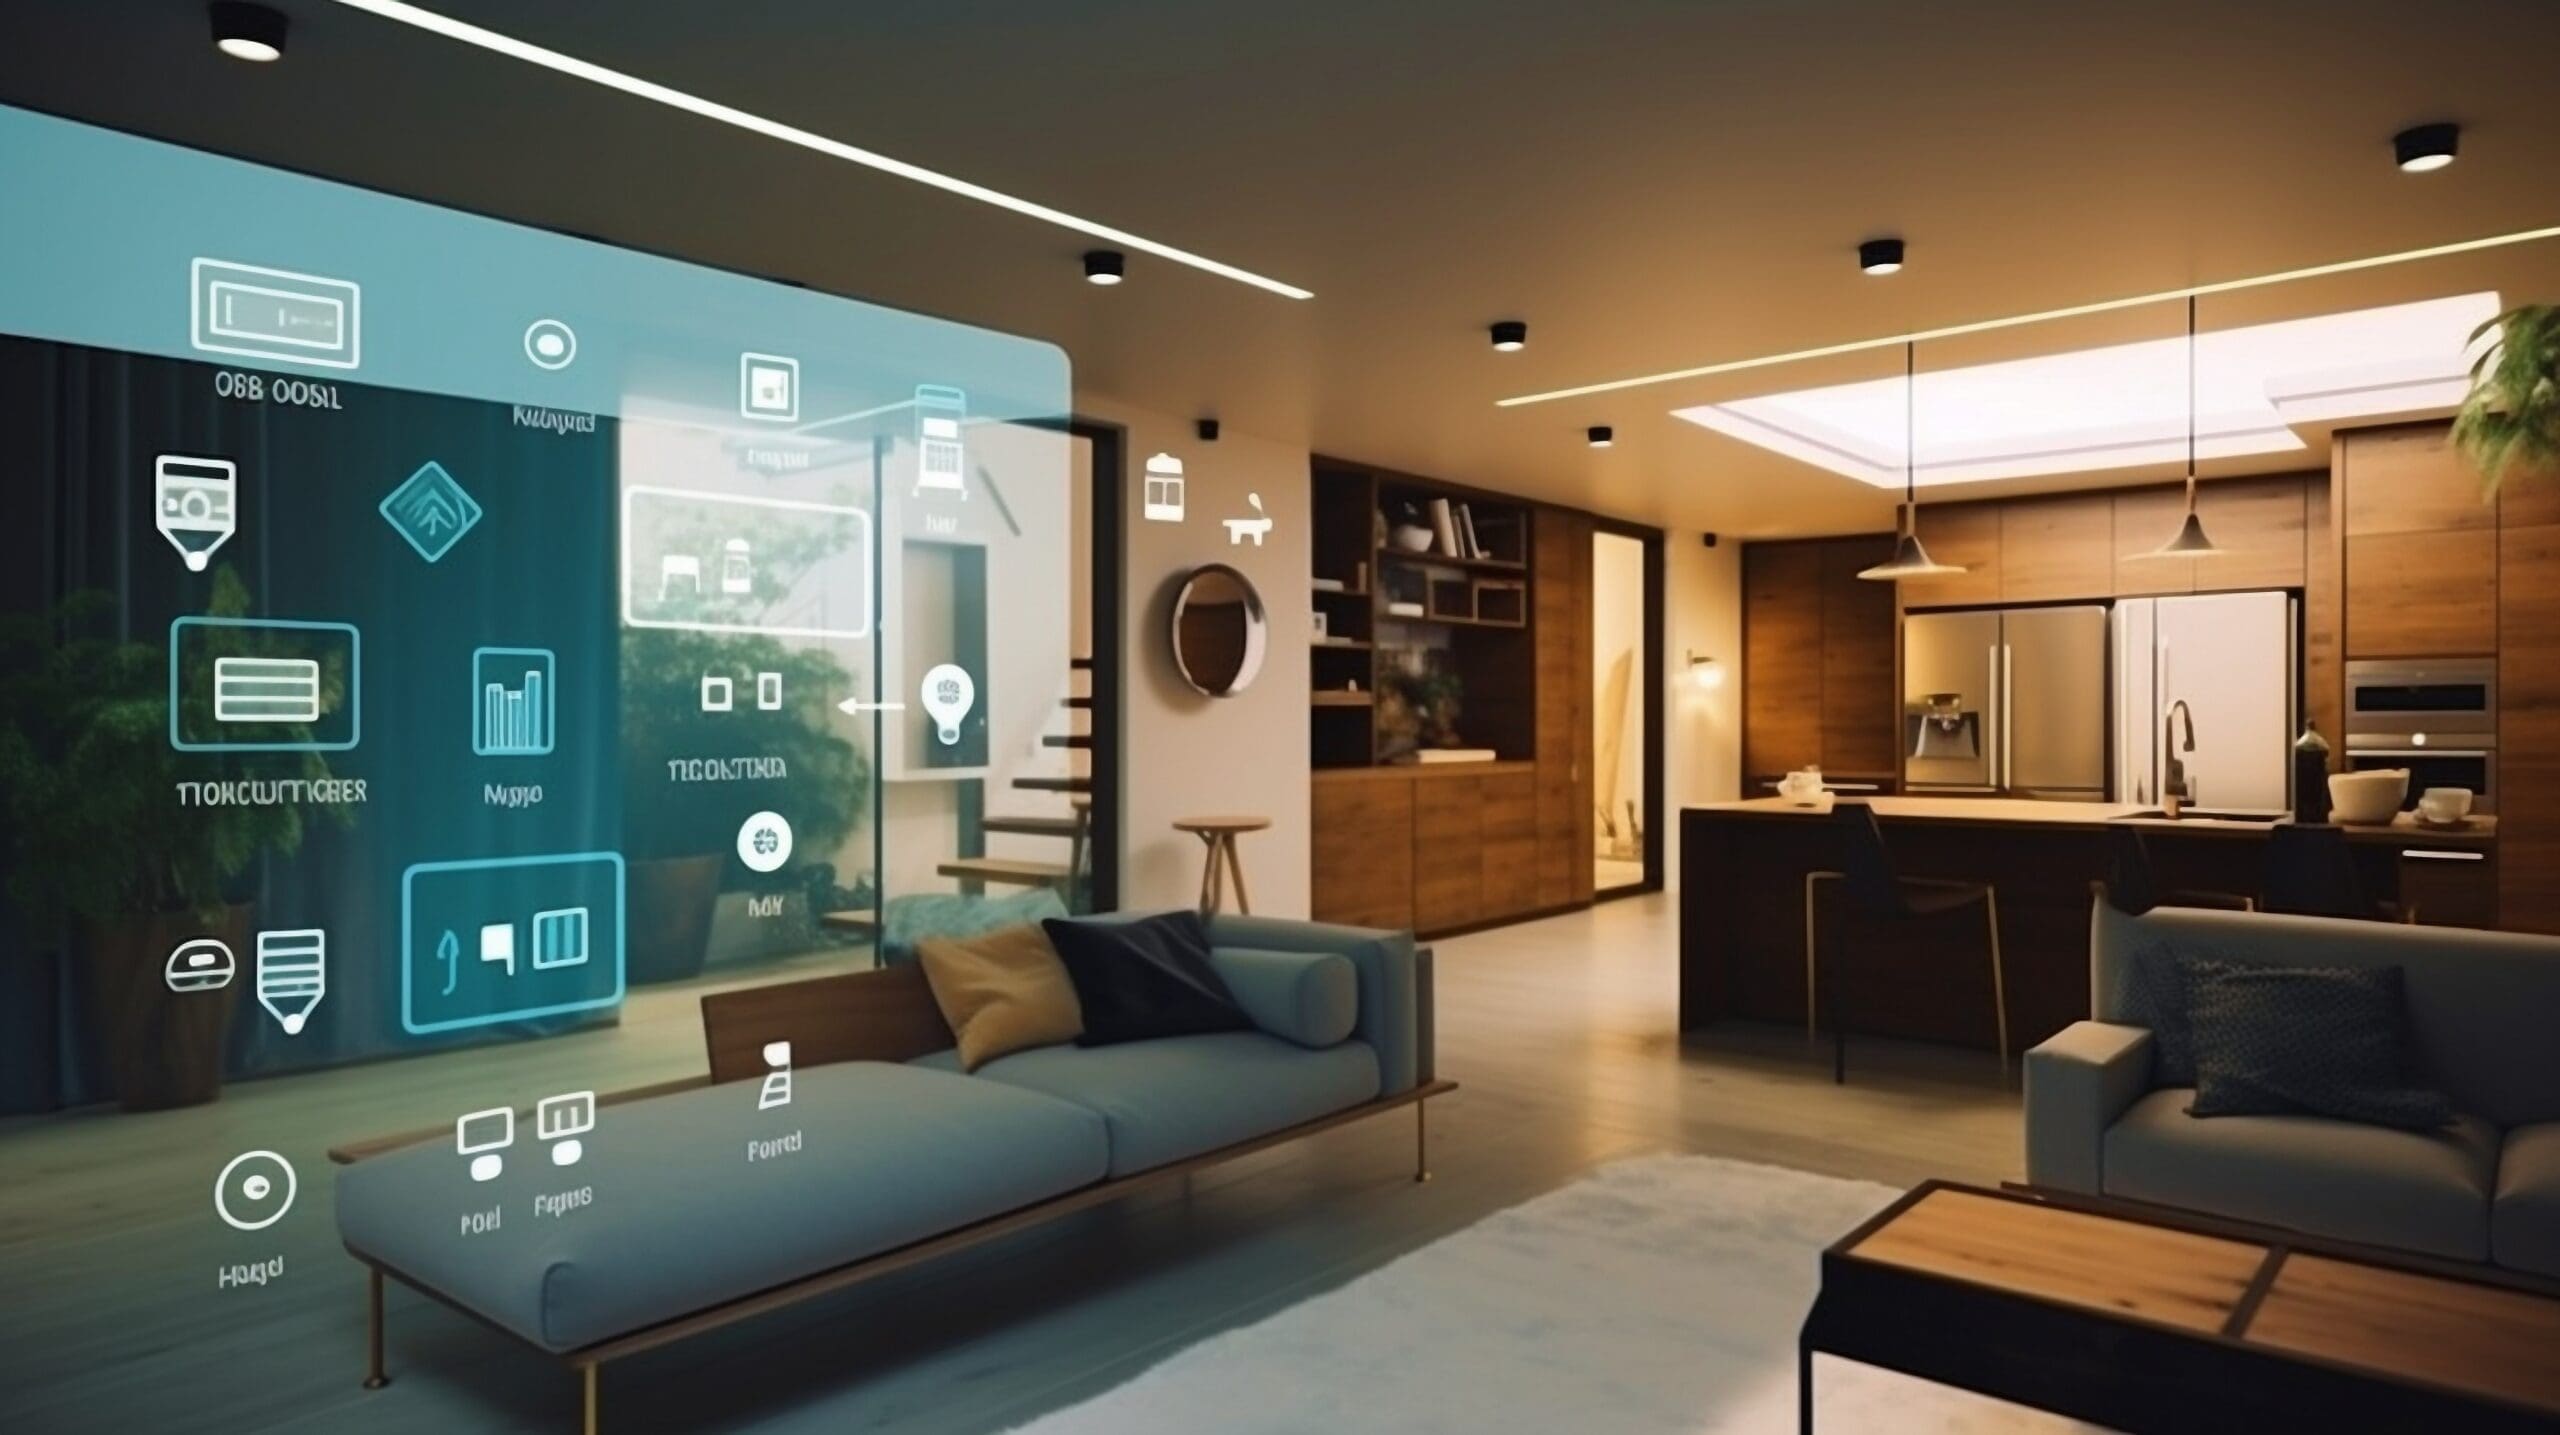 Integrating Smart Home Technology into High-End Construction